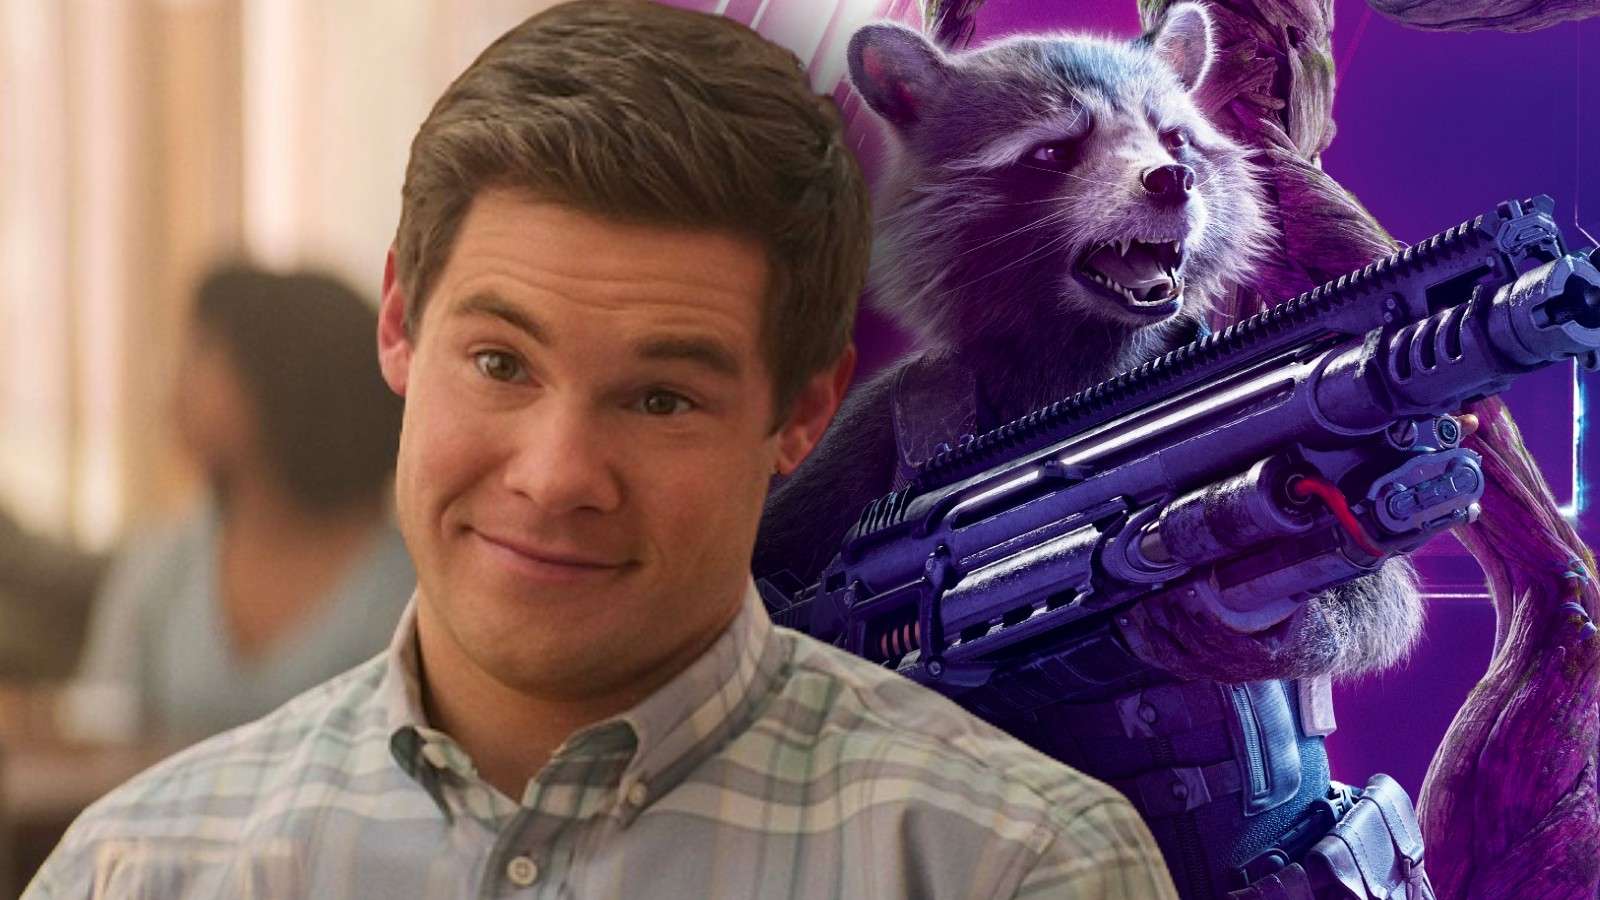 Adam DeVine in The Out-Laws and Rocket Raccoon